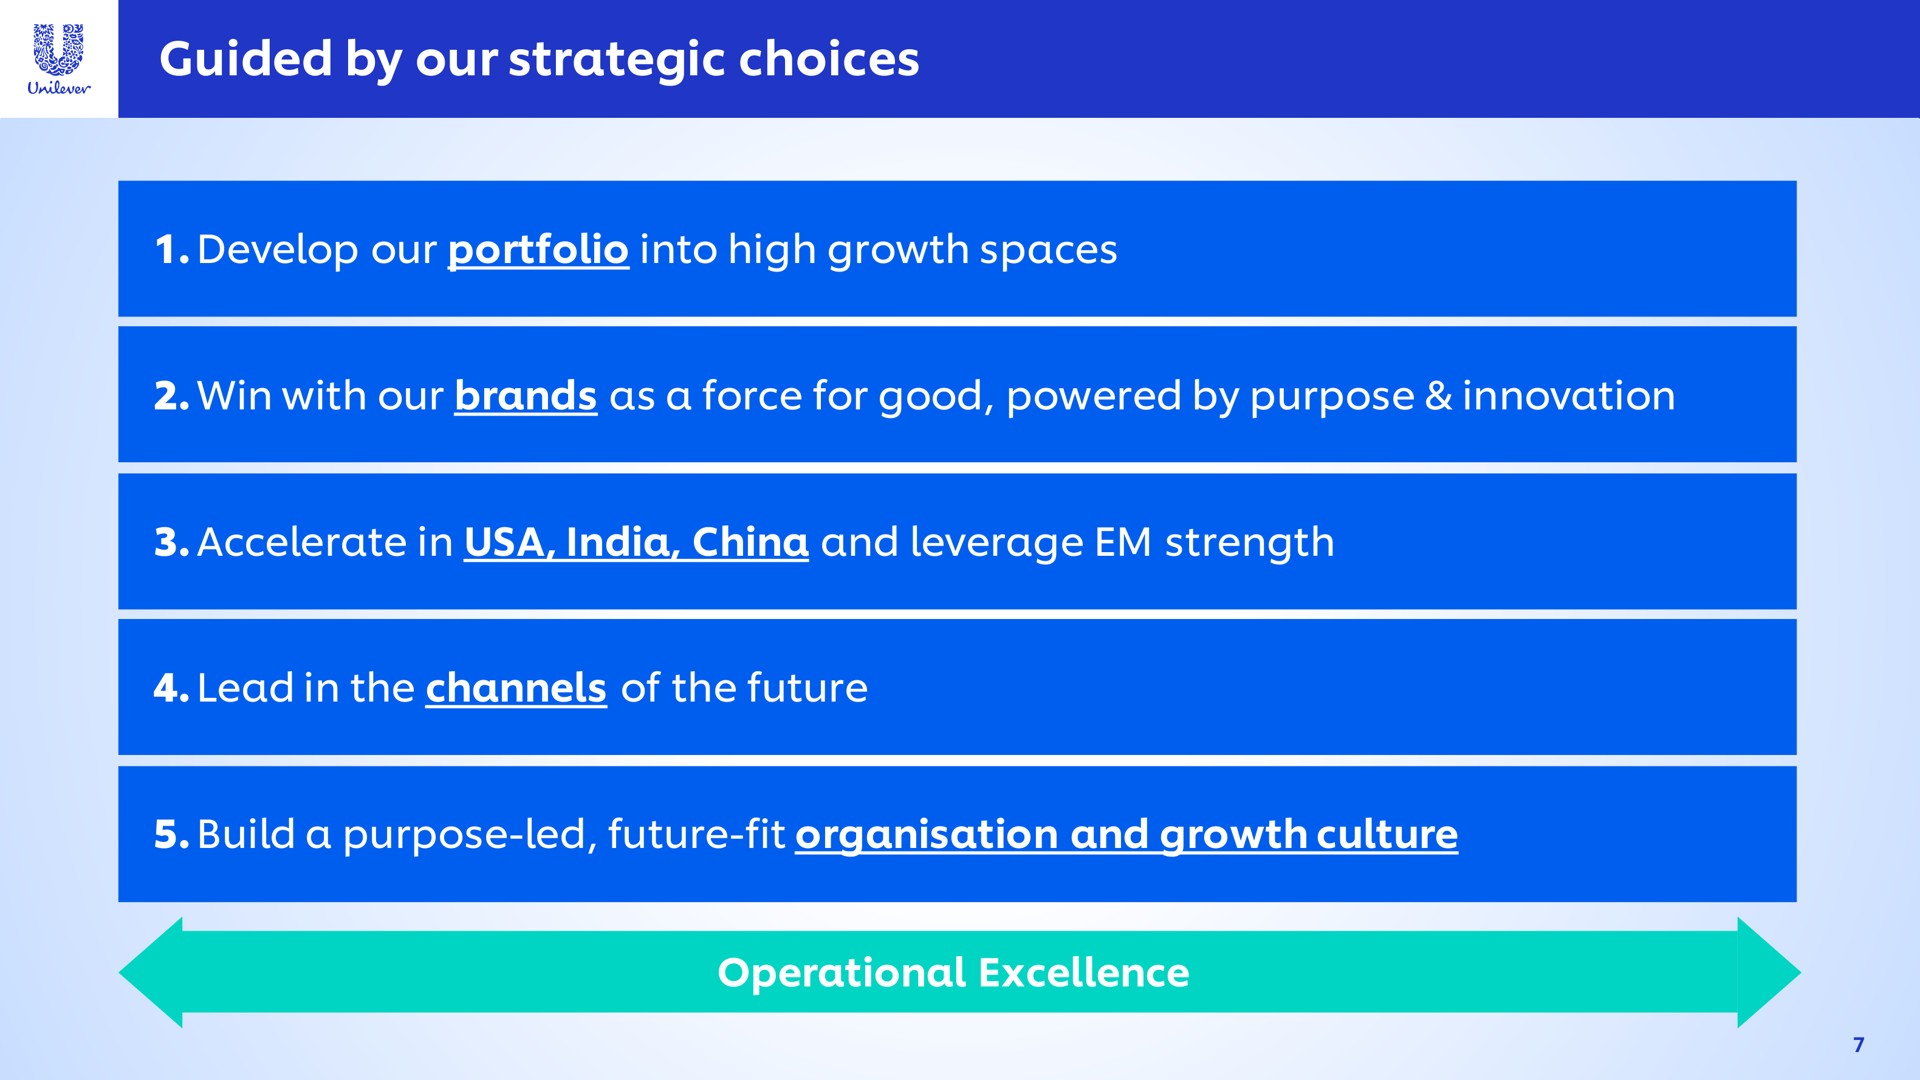 guided by our strategic choices develop our portfolio into high growth spaces win with our brands as a force for good powered by purpose innovation accelerate in china and leverage strength lead in the channels of the future build a purpose led future fit and growth culture operational excellence | Unilever